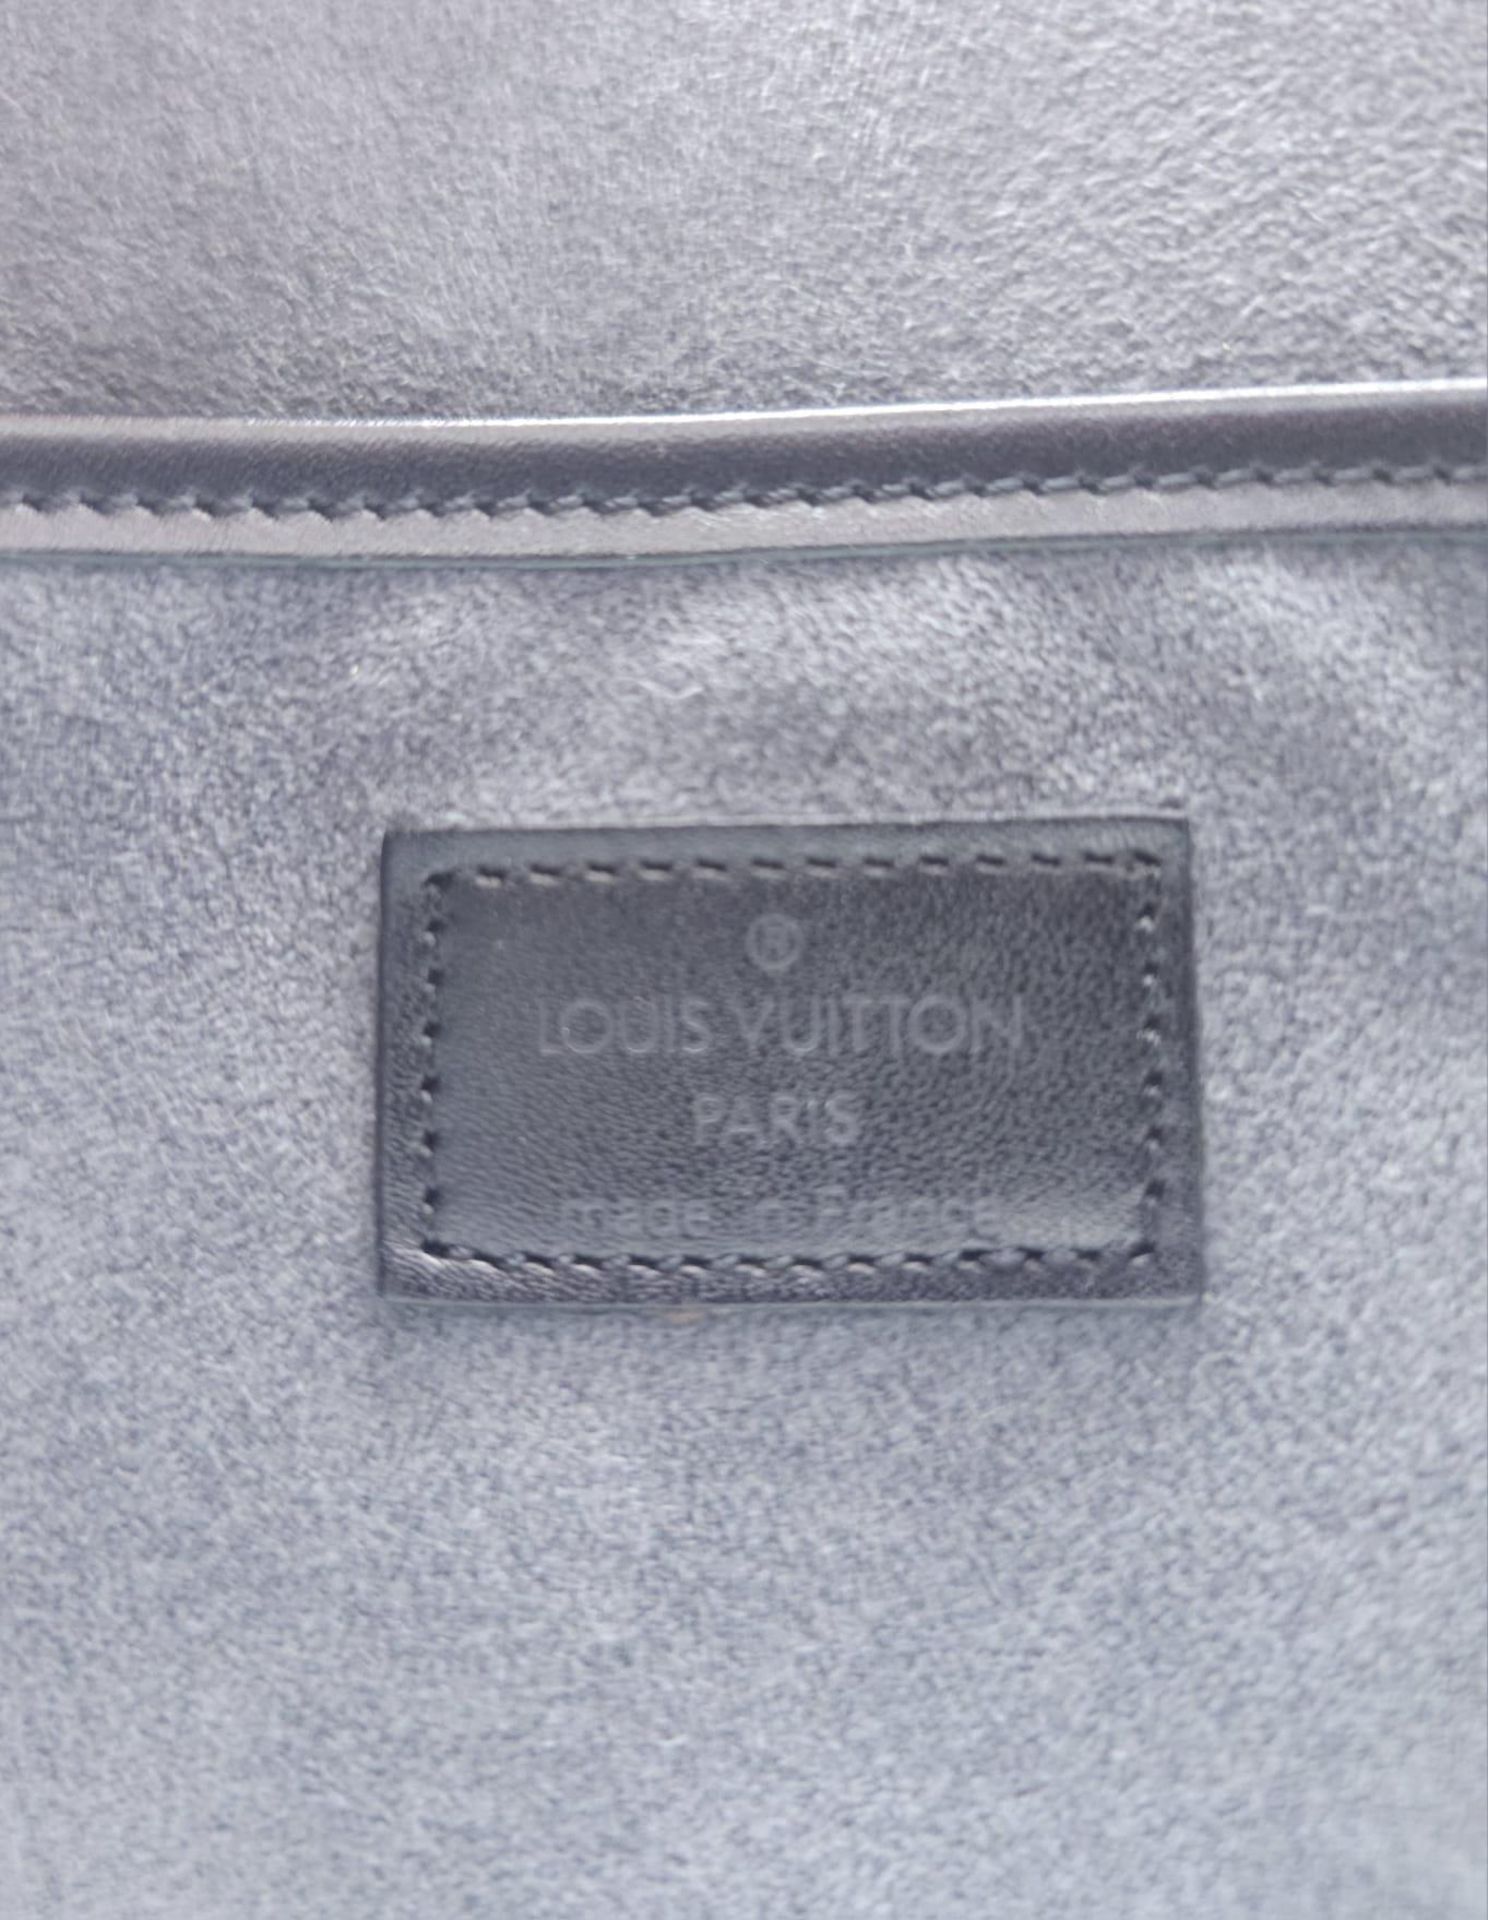 A Louis Vuitton Black Ombre Bag. Epi leather exterior. Grey textile interior with inner side pocket. - Image 10 of 10